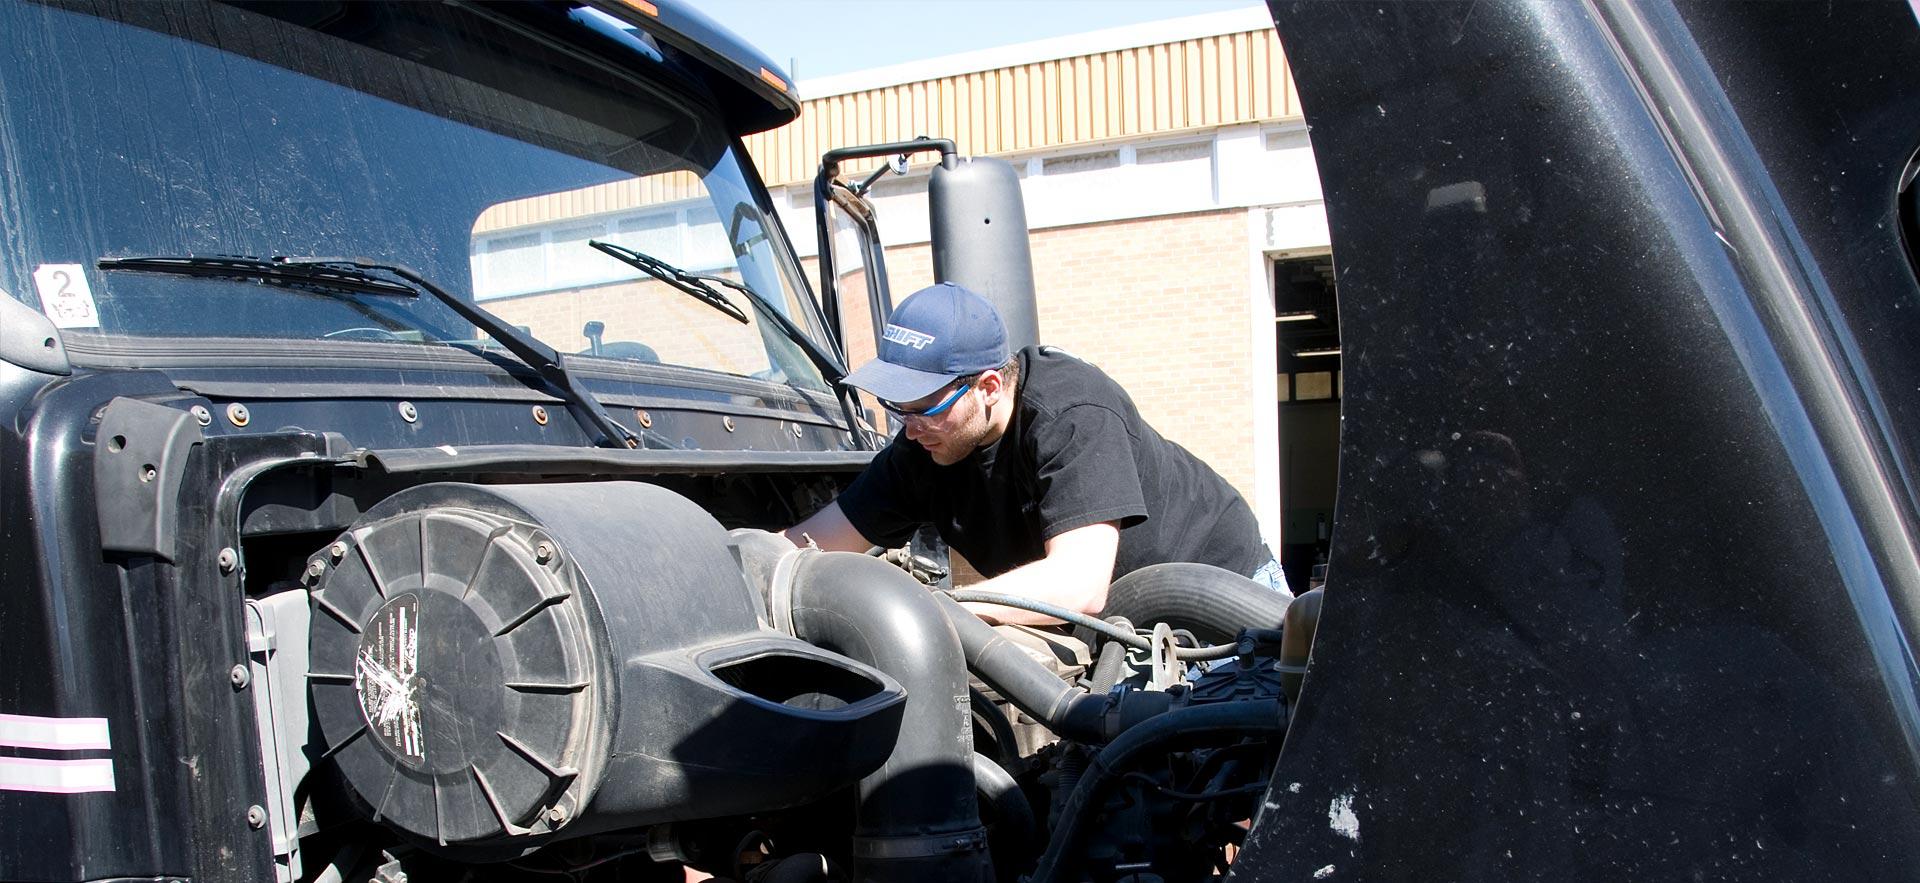 One male Motive Power Fundamentals - Heavy Equipment and Truck Repair student works on a truck engine. 